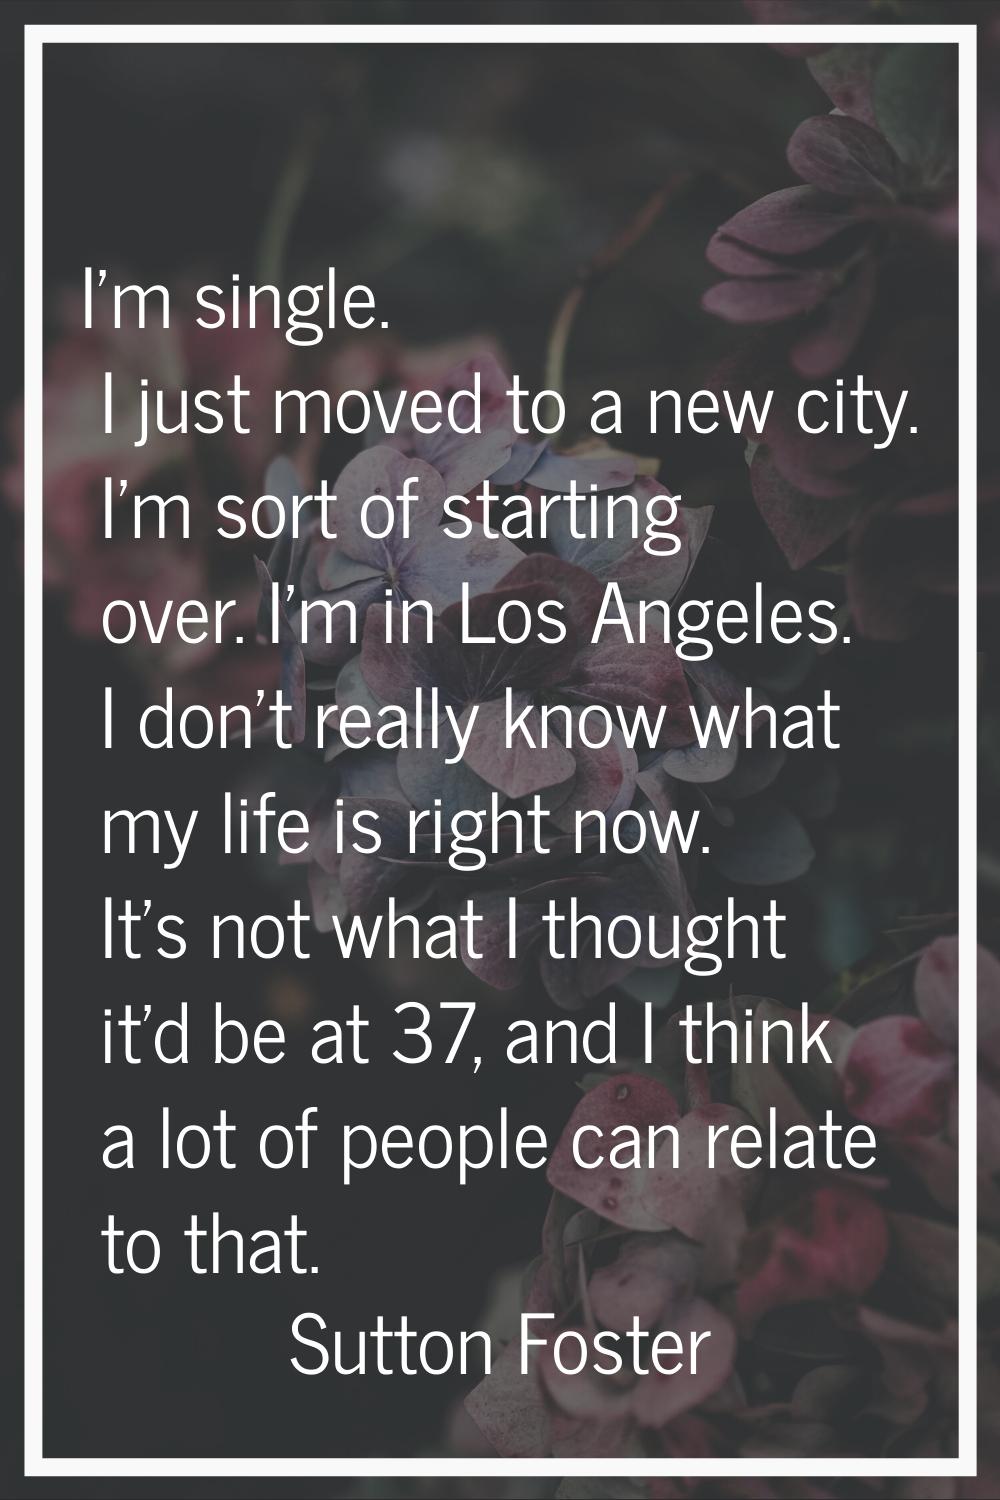 I'm single. I just moved to a new city. I'm sort of starting over. I'm in Los Angeles. I don't real